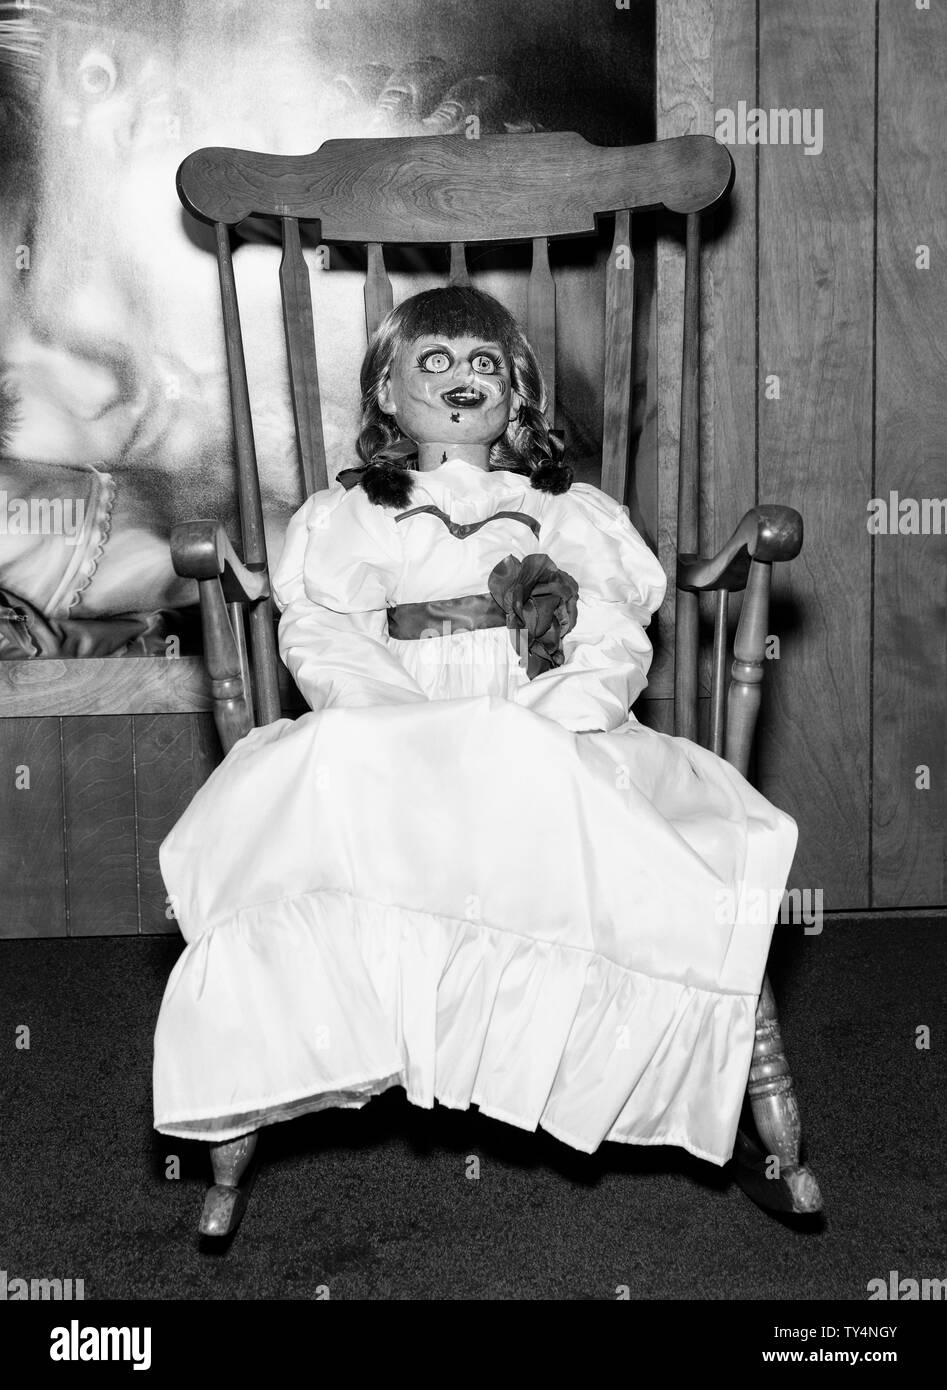 Annabelle doll Black and White Stock Photos & Images - Alamy